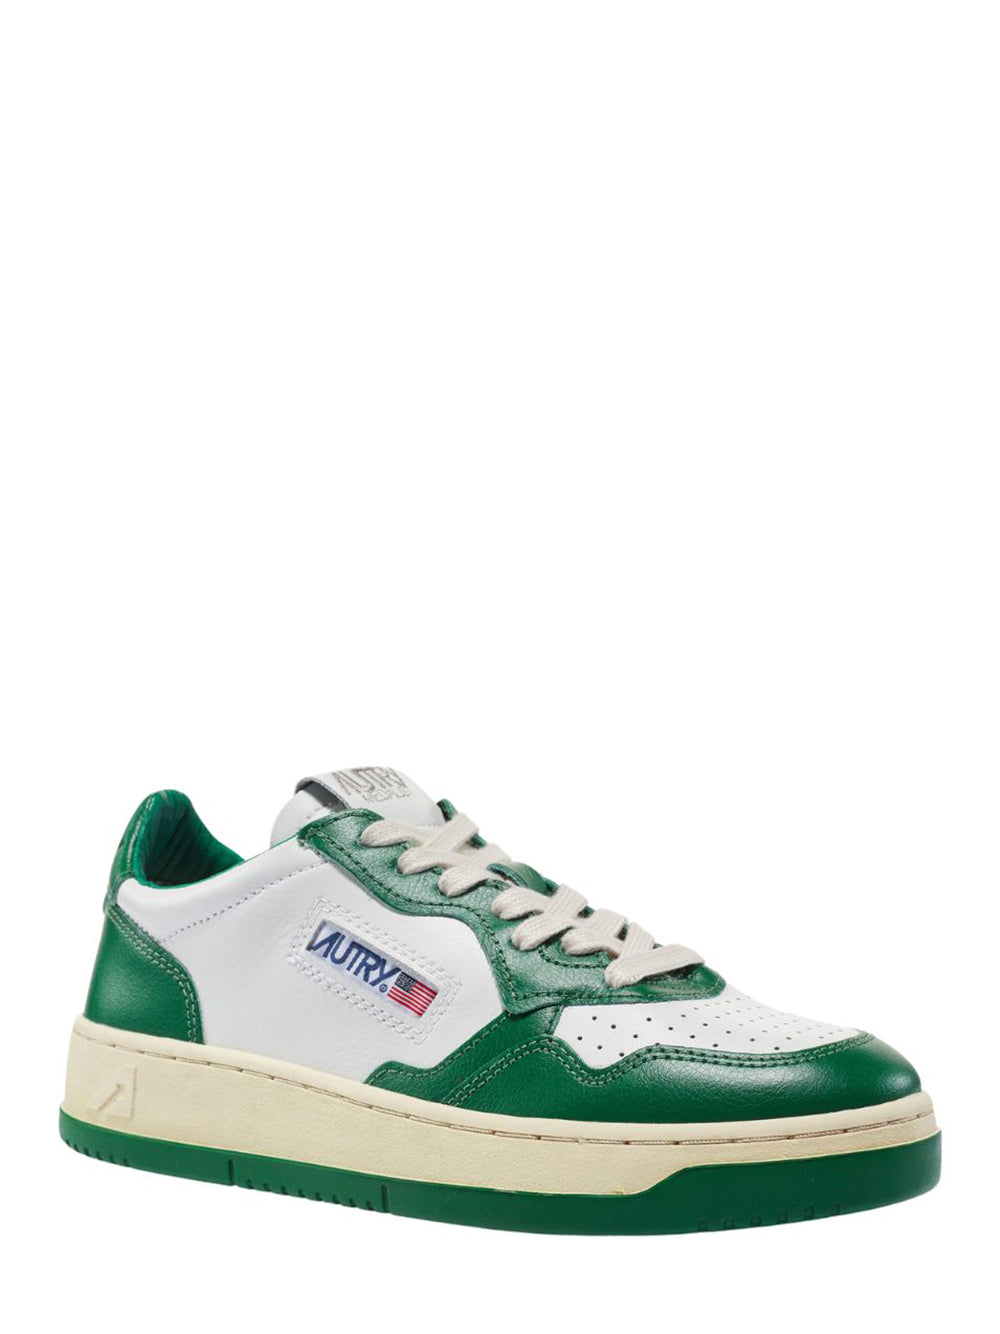 Medalist Low Sneakers In Two-Tone Leather (White And Green) (Women)